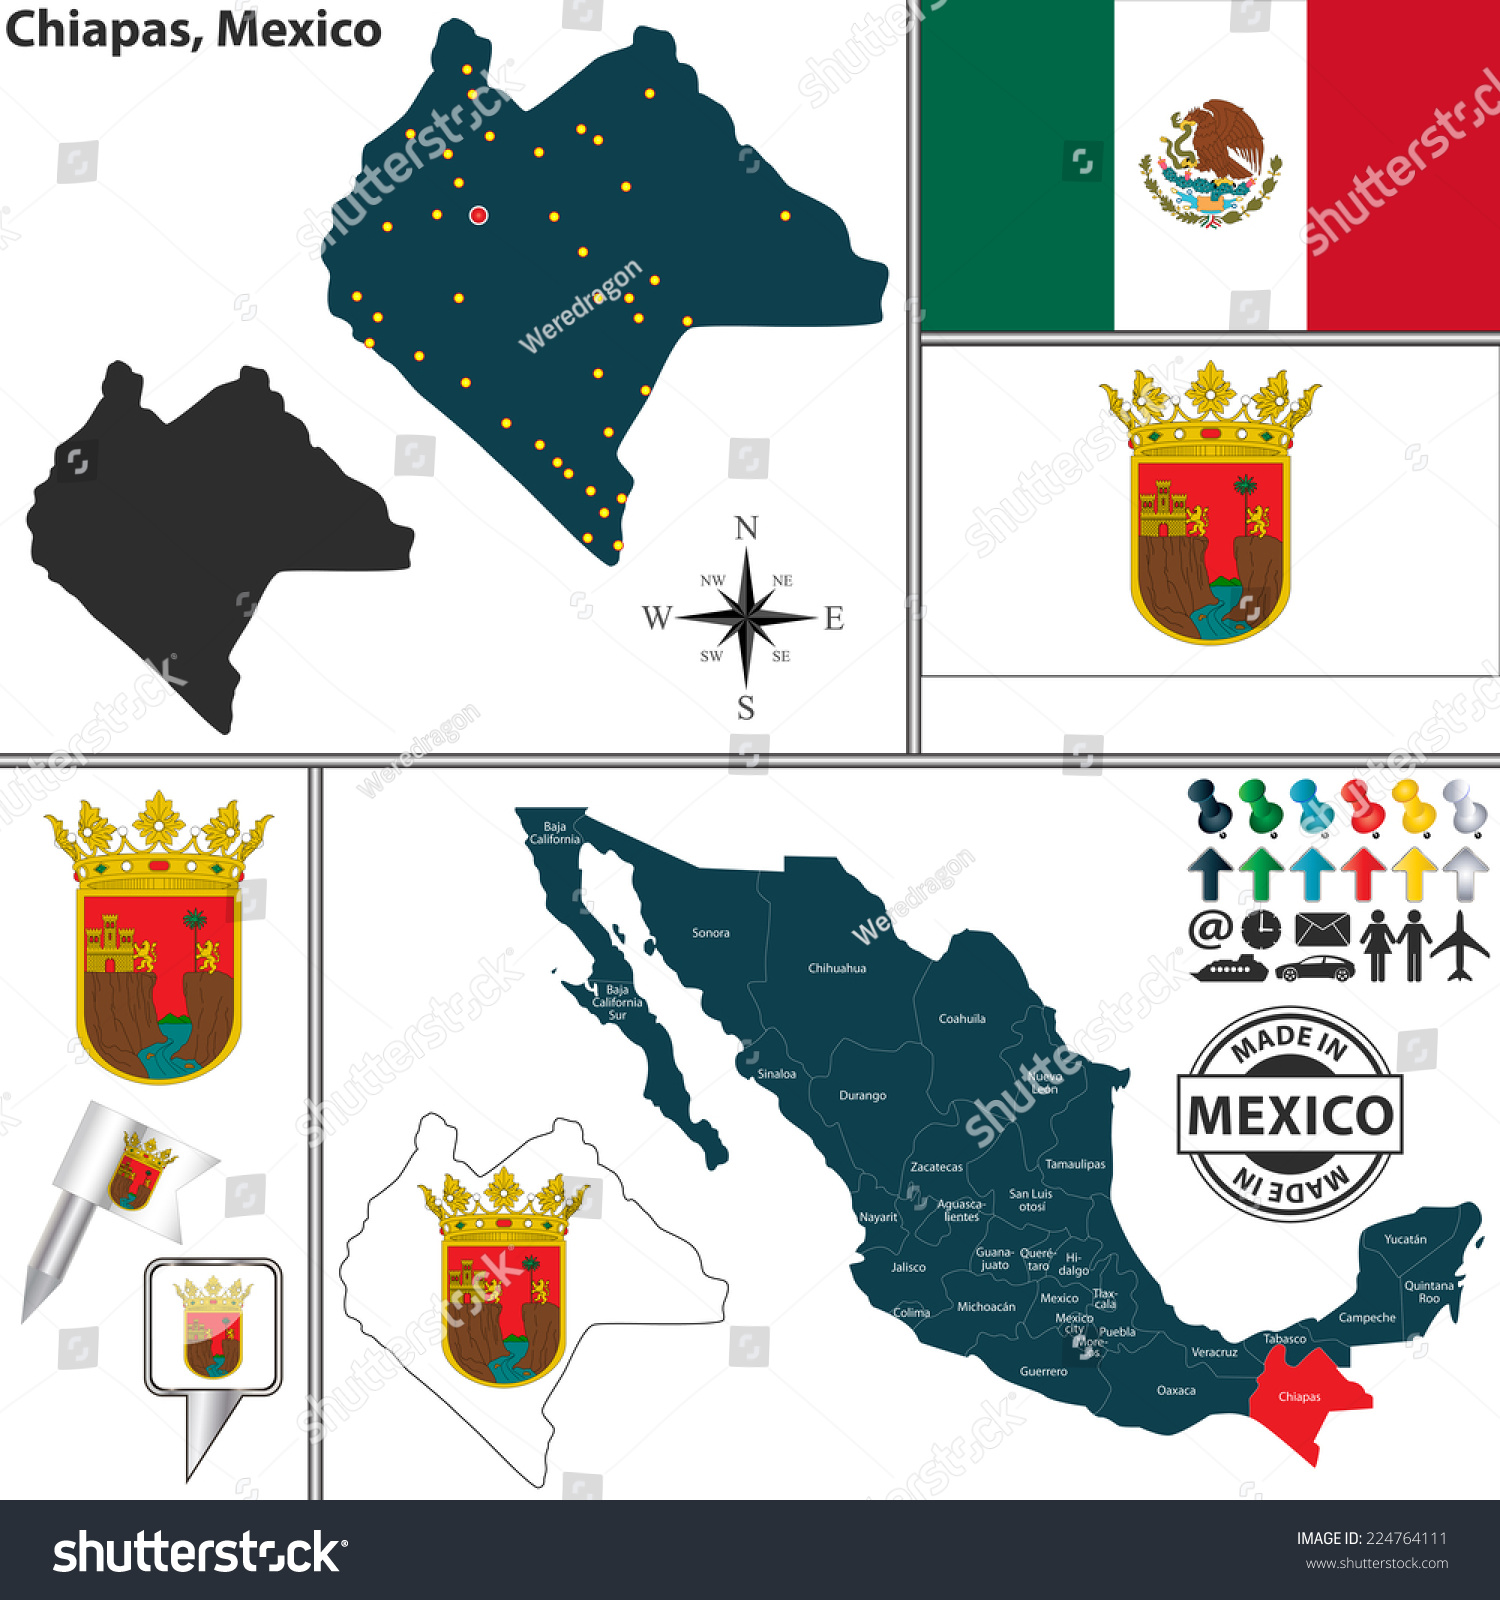 Vector Map Of State Chiapas With Coat Of Arms Royalty Free Stock Vector 224764111 0019